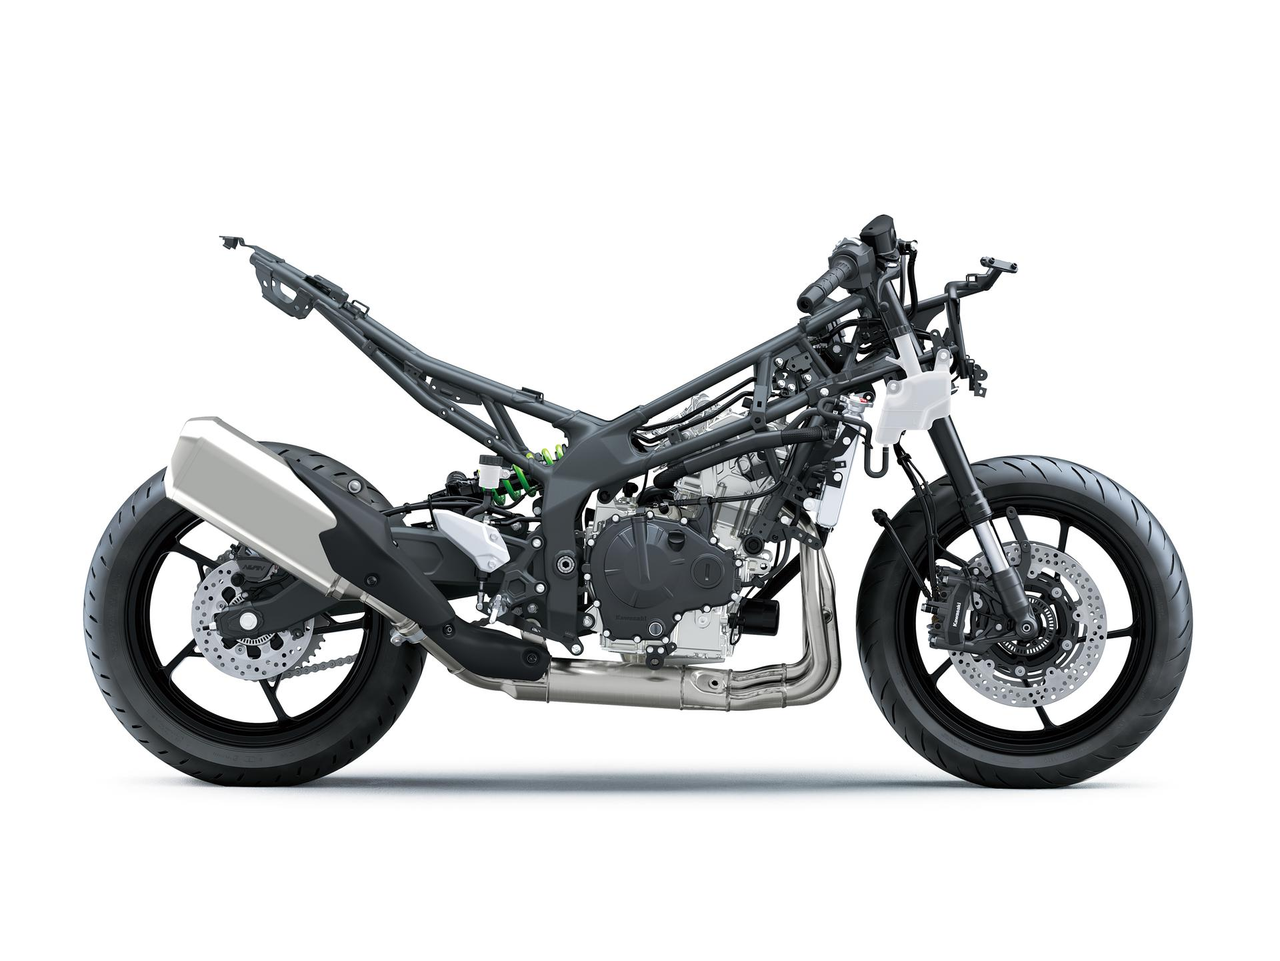 Ultra-Compact Nimble Supersport Chassis